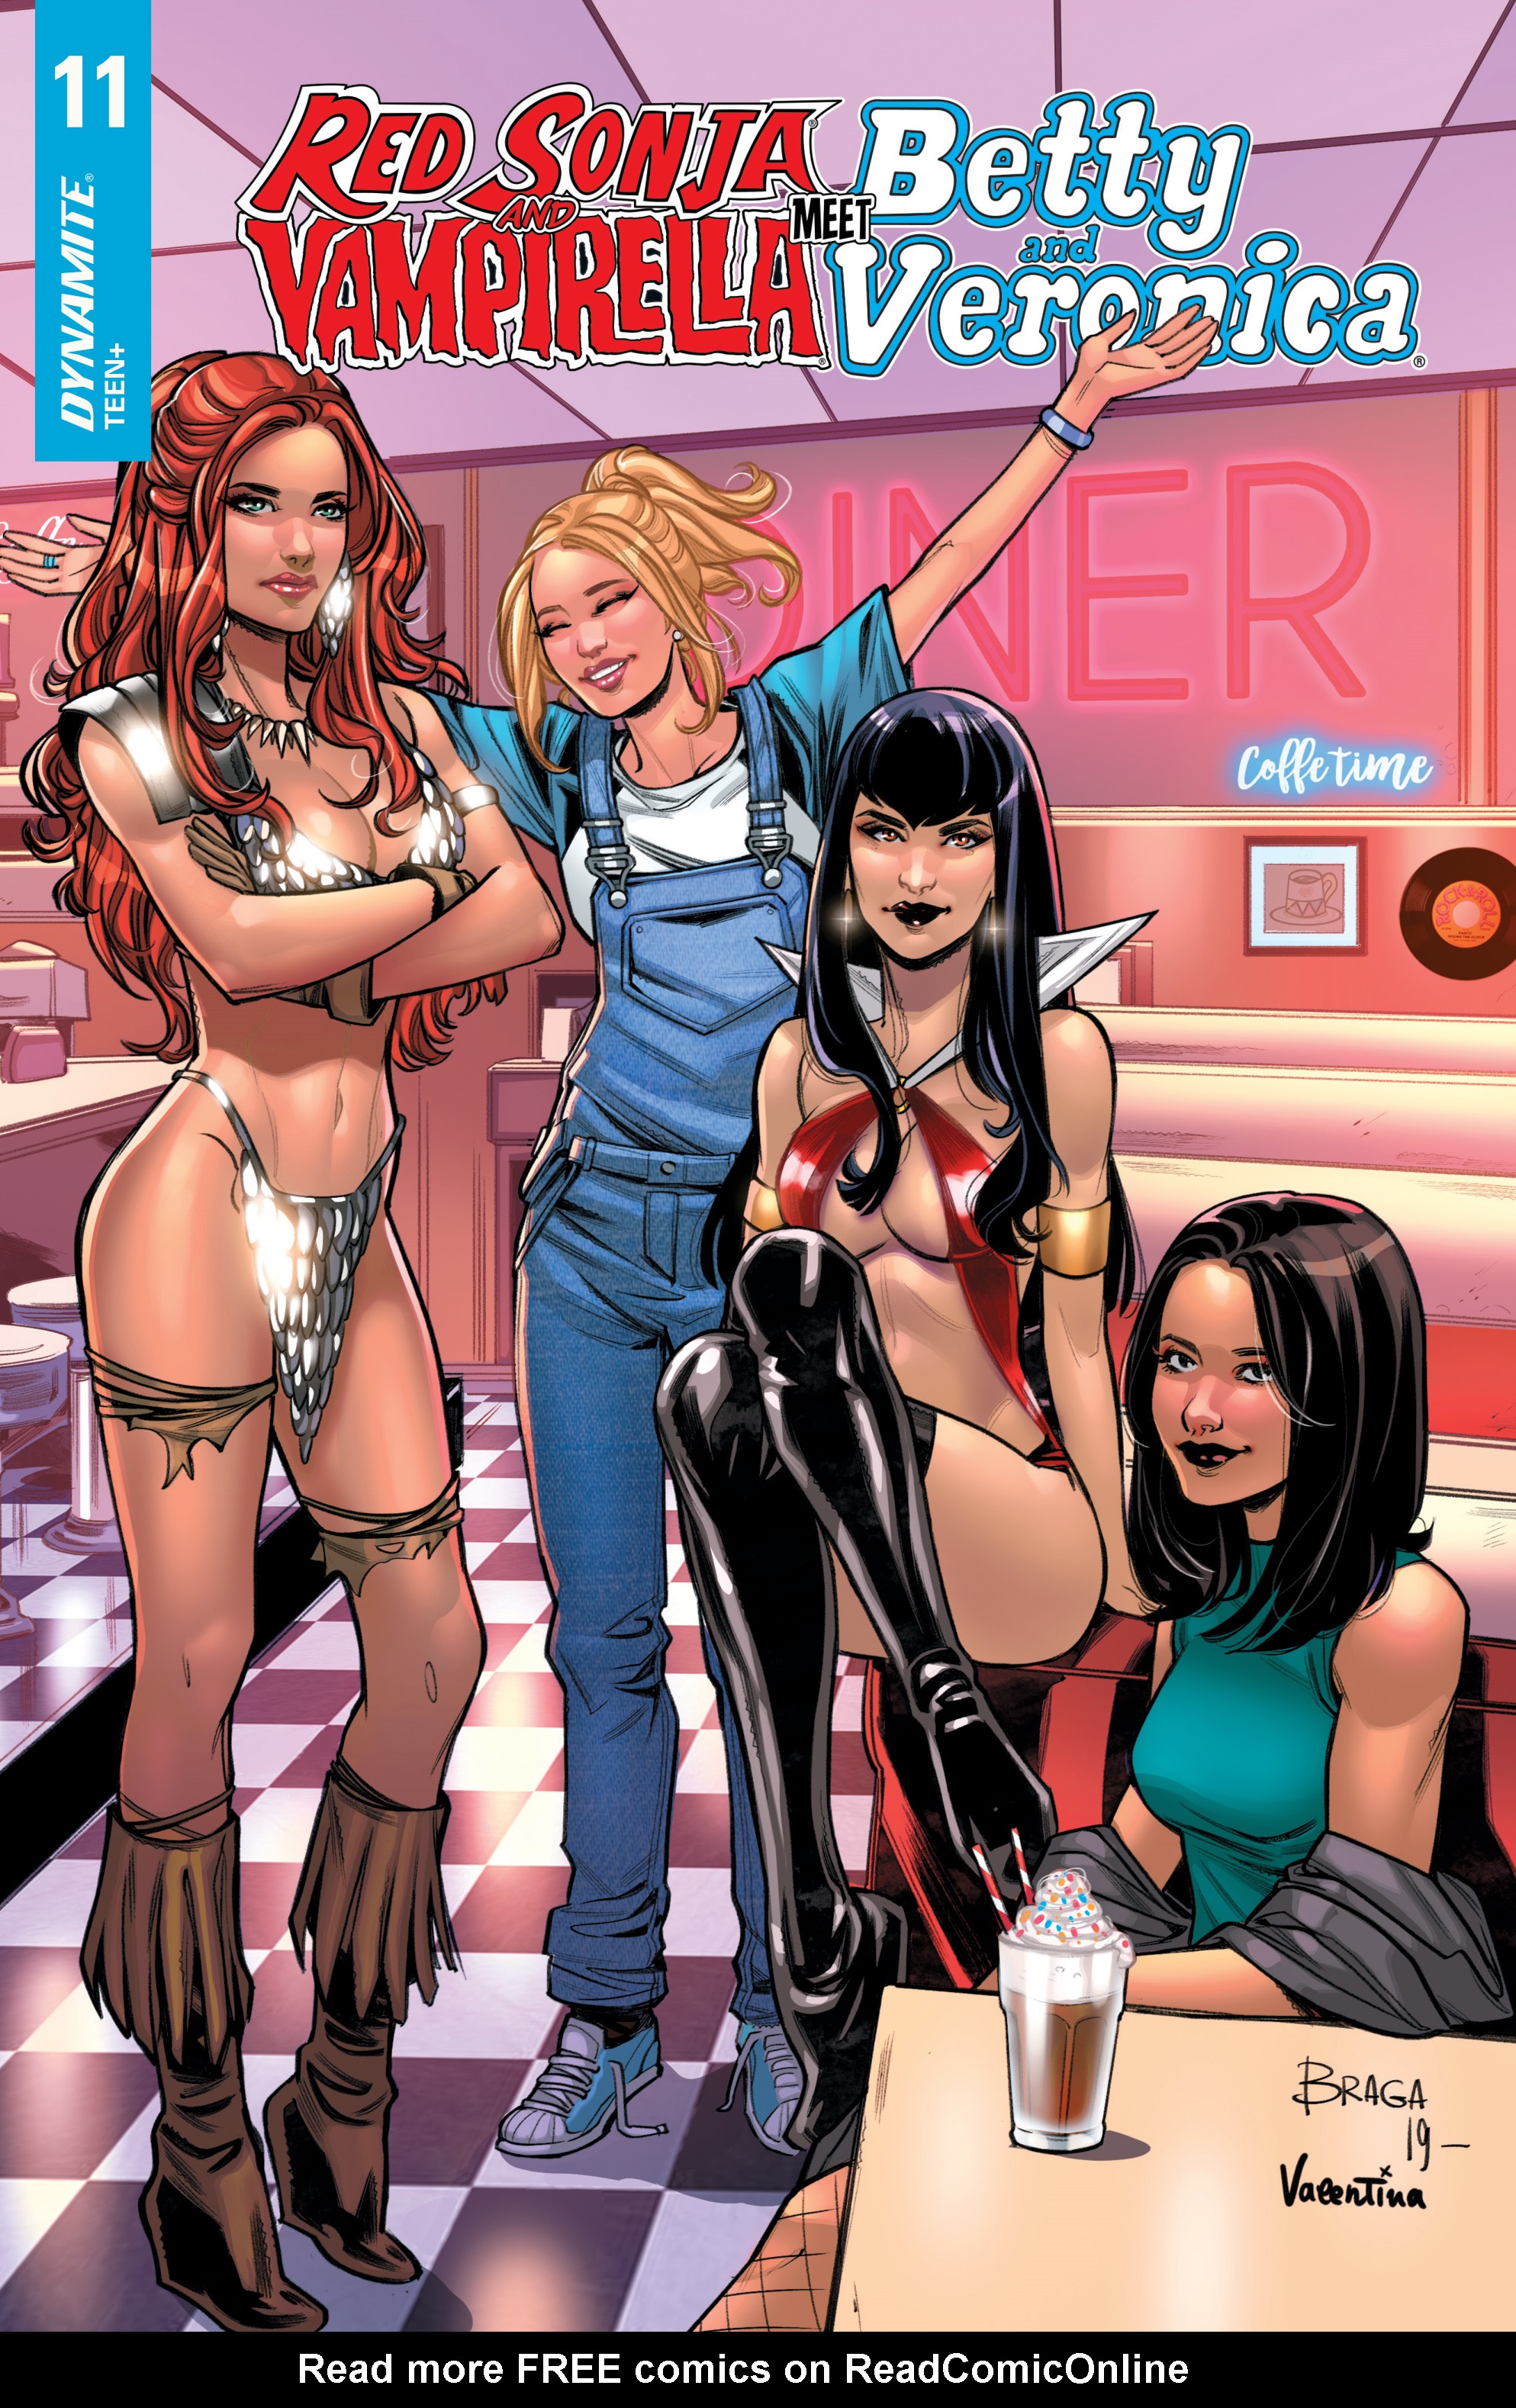 Read online Red Sonja and Vampirella Meet Betty and Veronica comic -  Issue #11 - 3